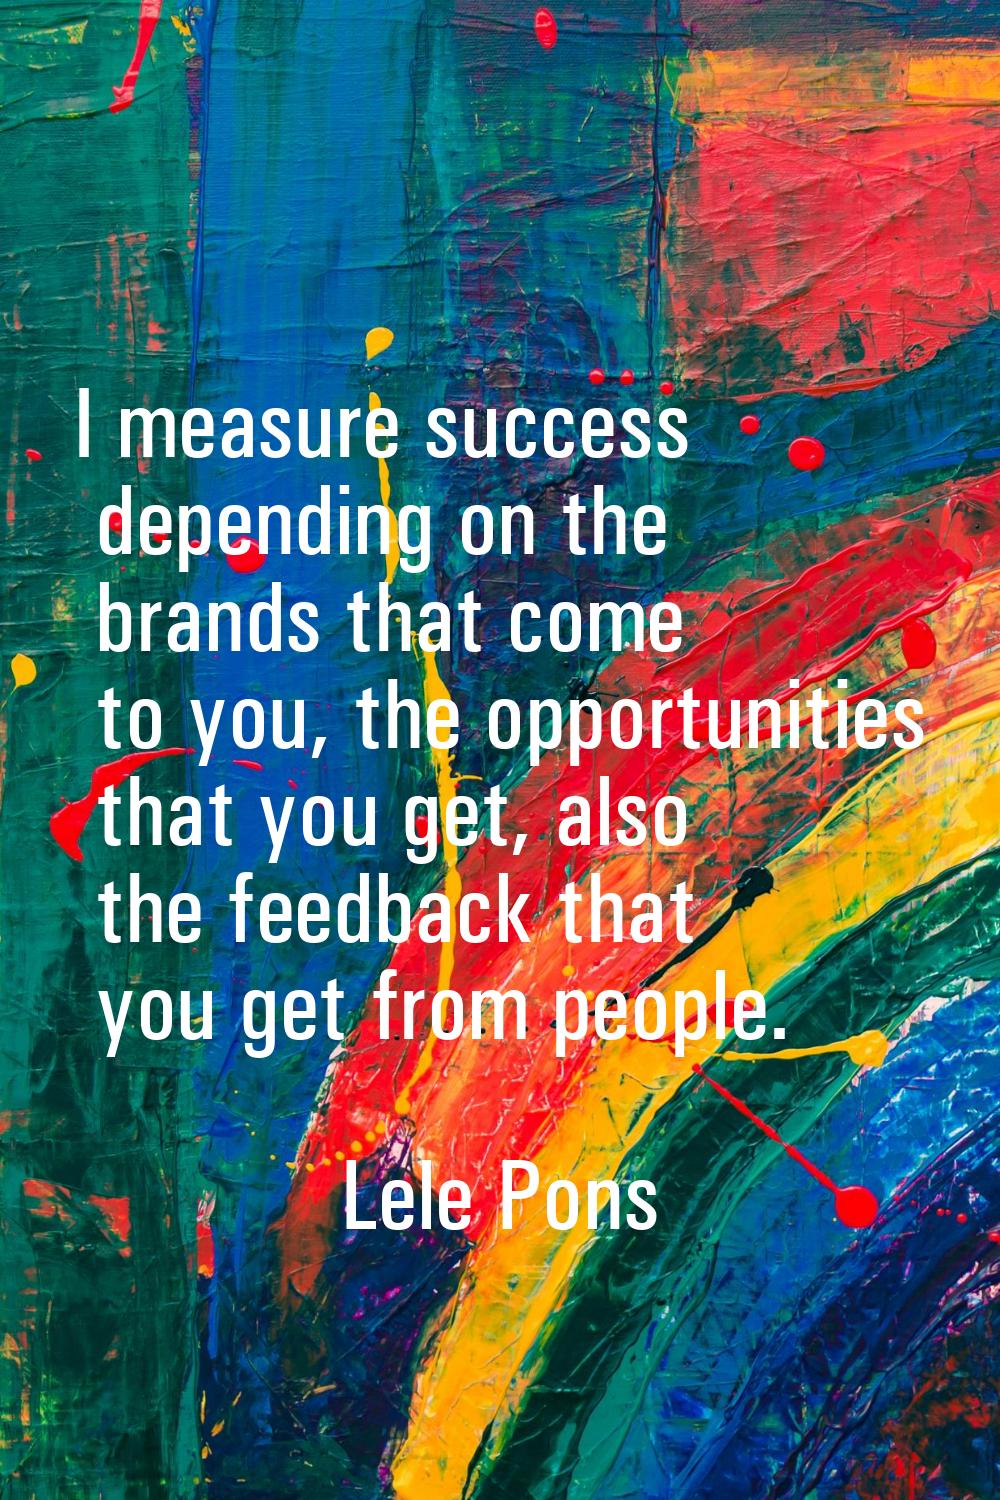 I measure success depending on the brands that come to you, the opportunities that you get, also th